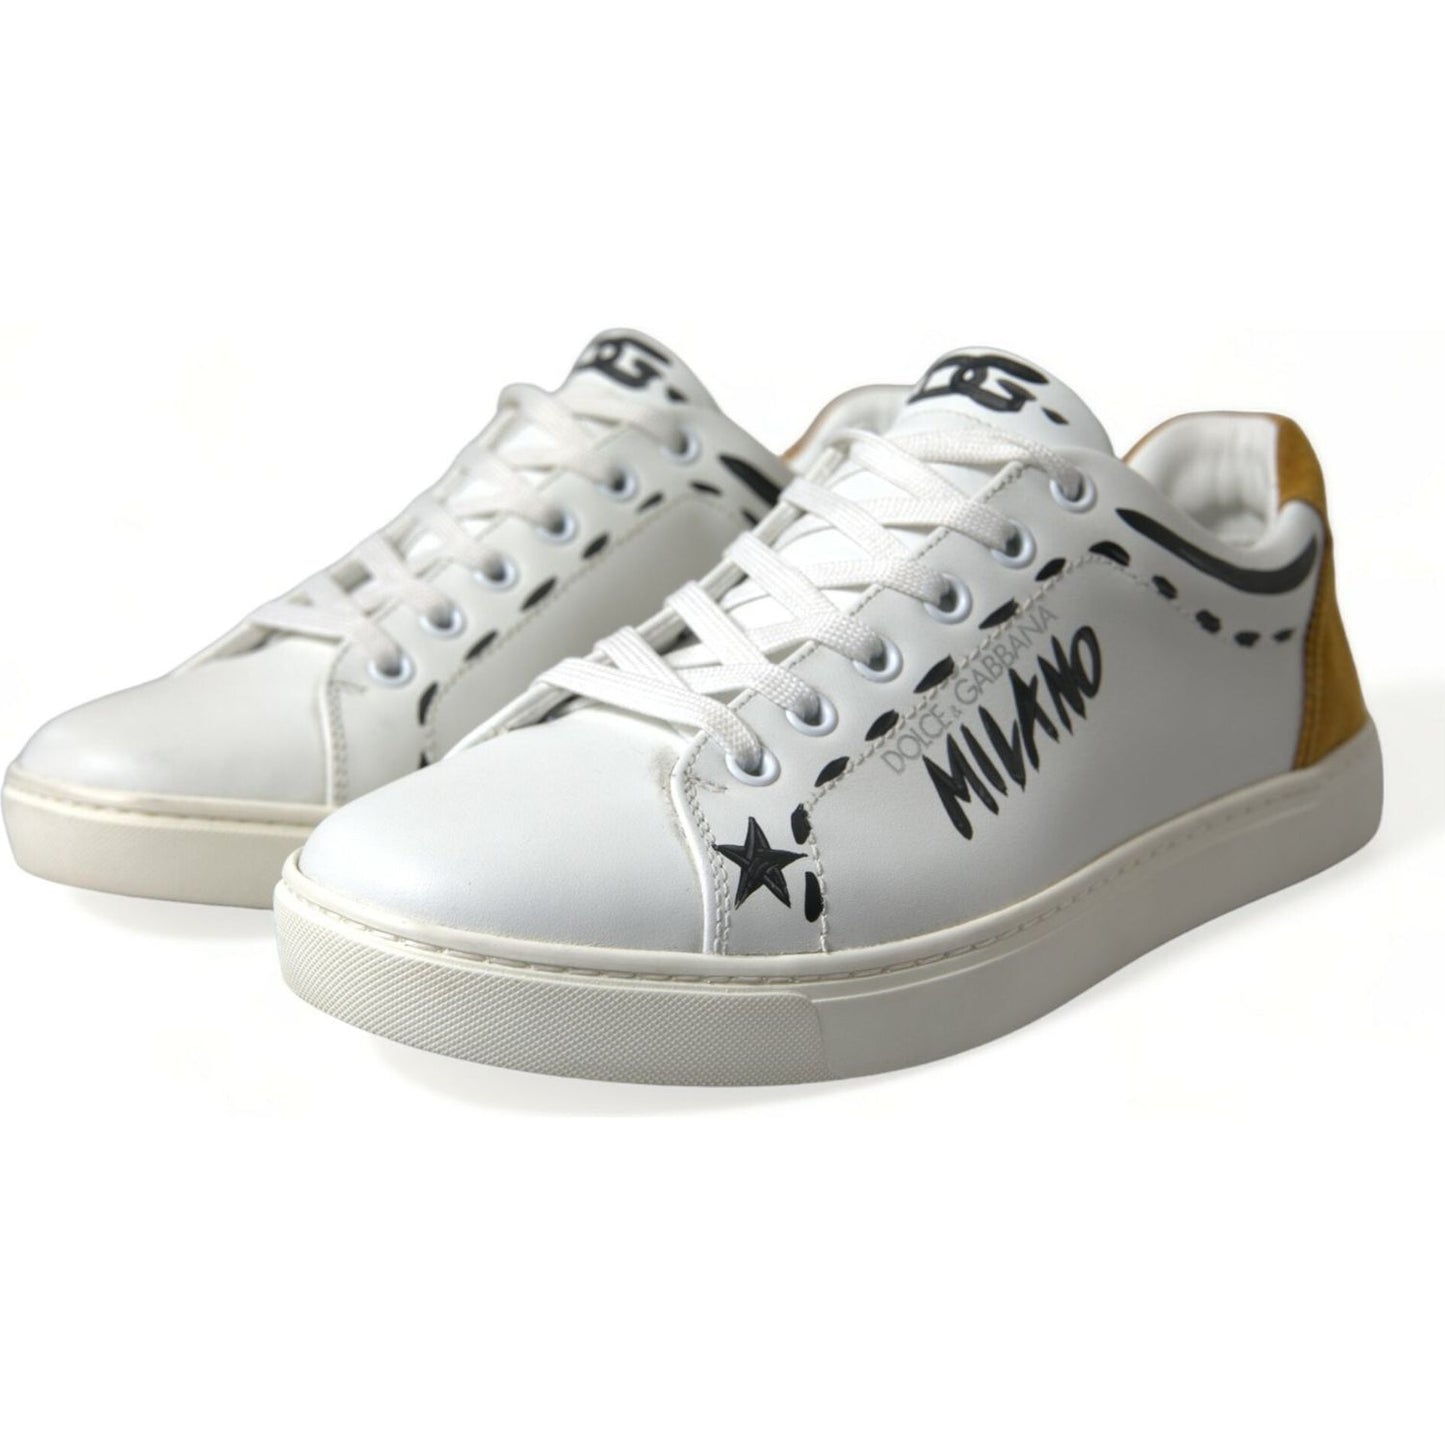 Dolce & Gabbana Sleek White Low Top Leather Sneakers white-leather-love-milano-men-sneakers-shoes